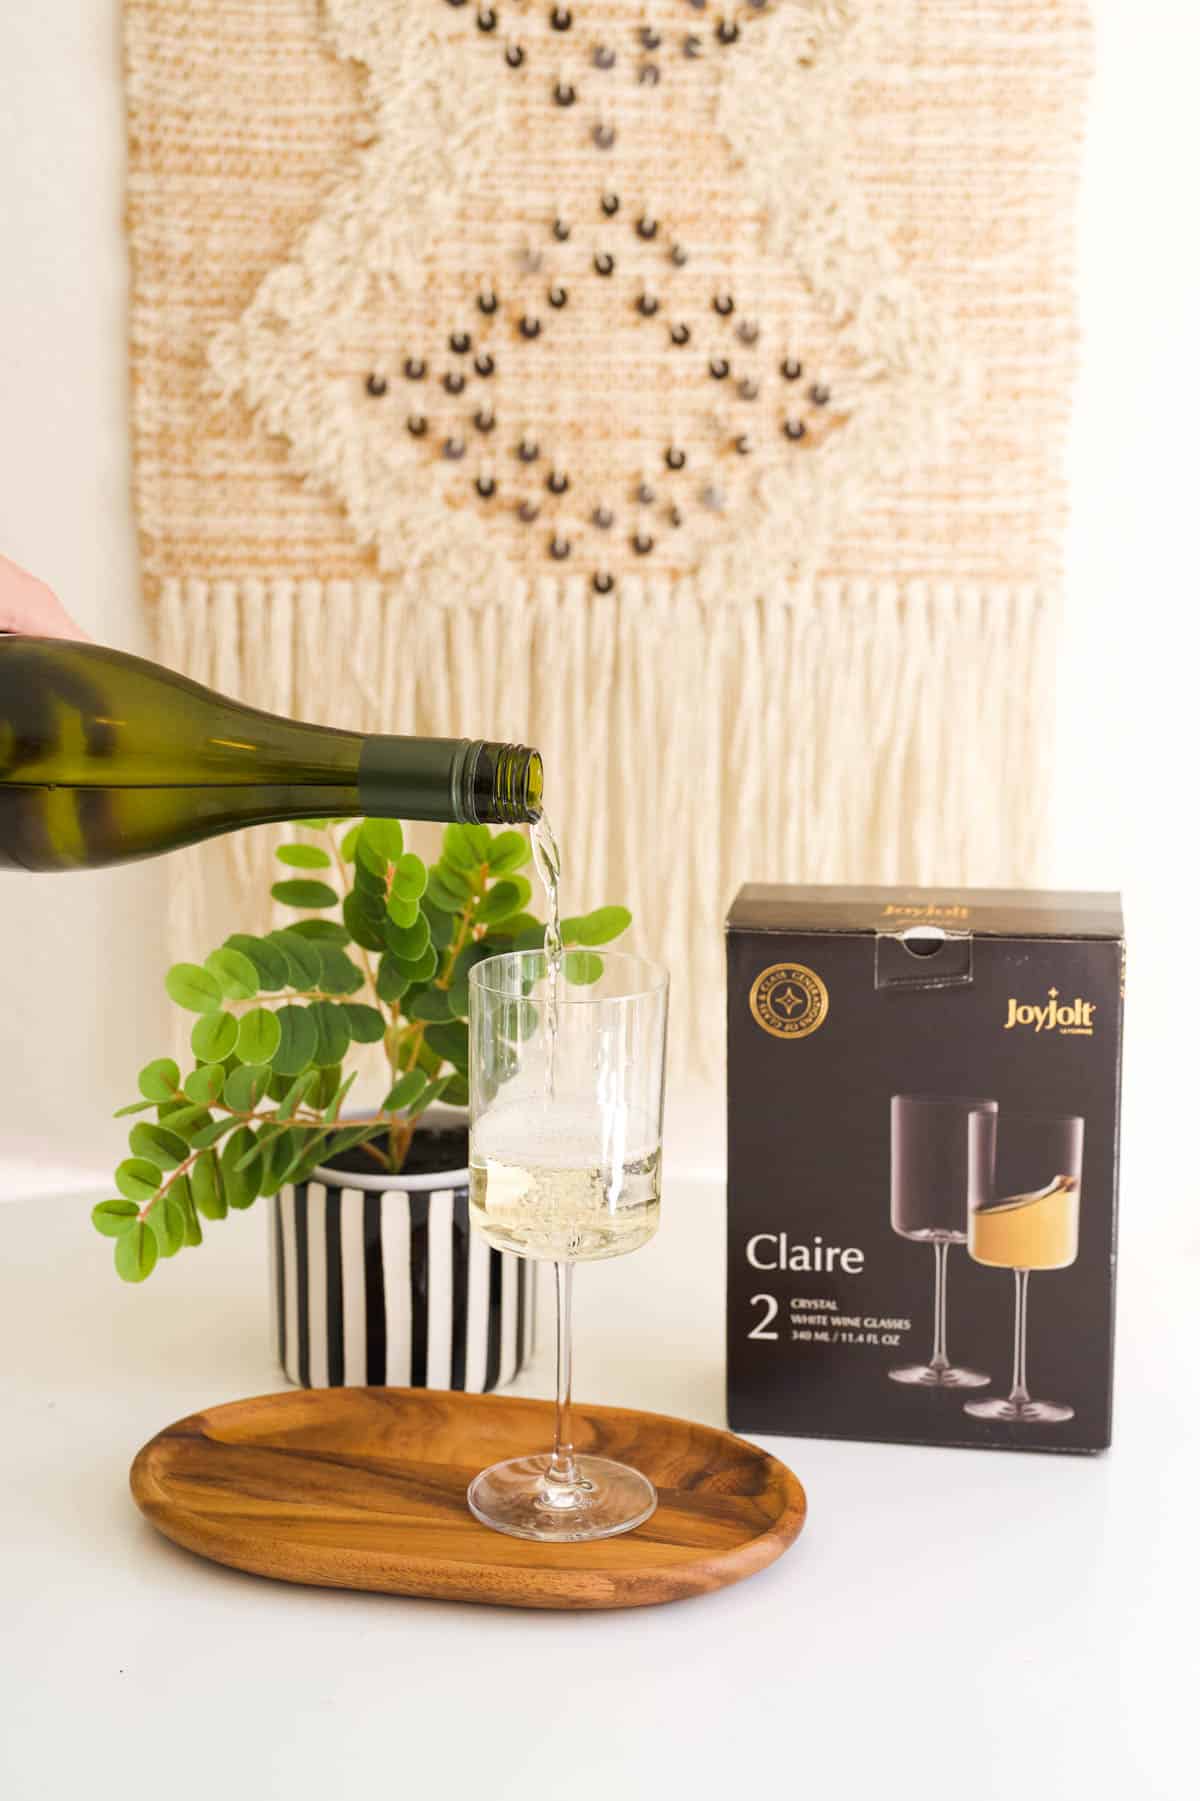 White wine glass on a table with wine being poured and the box next to it.